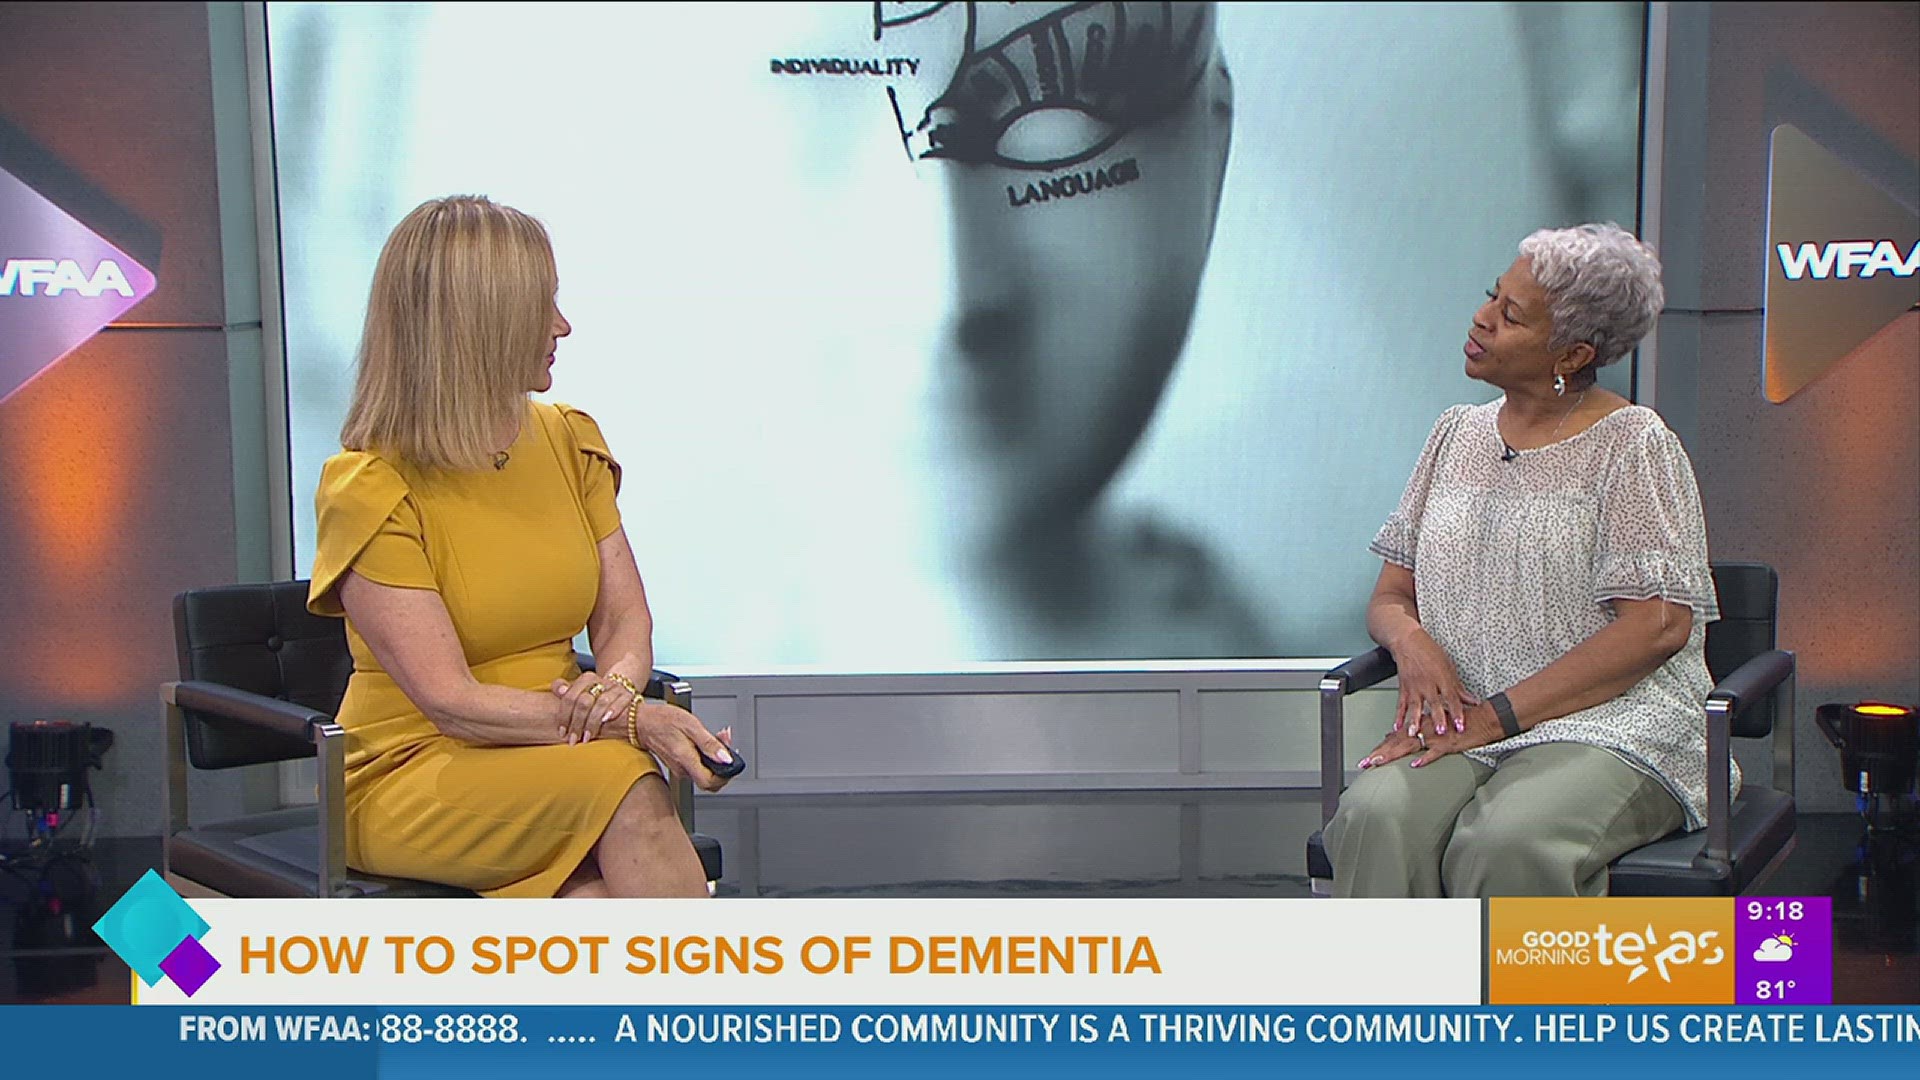 Debra Dickerson shares how her own experience made her want to help others who have loved ones with dementia.